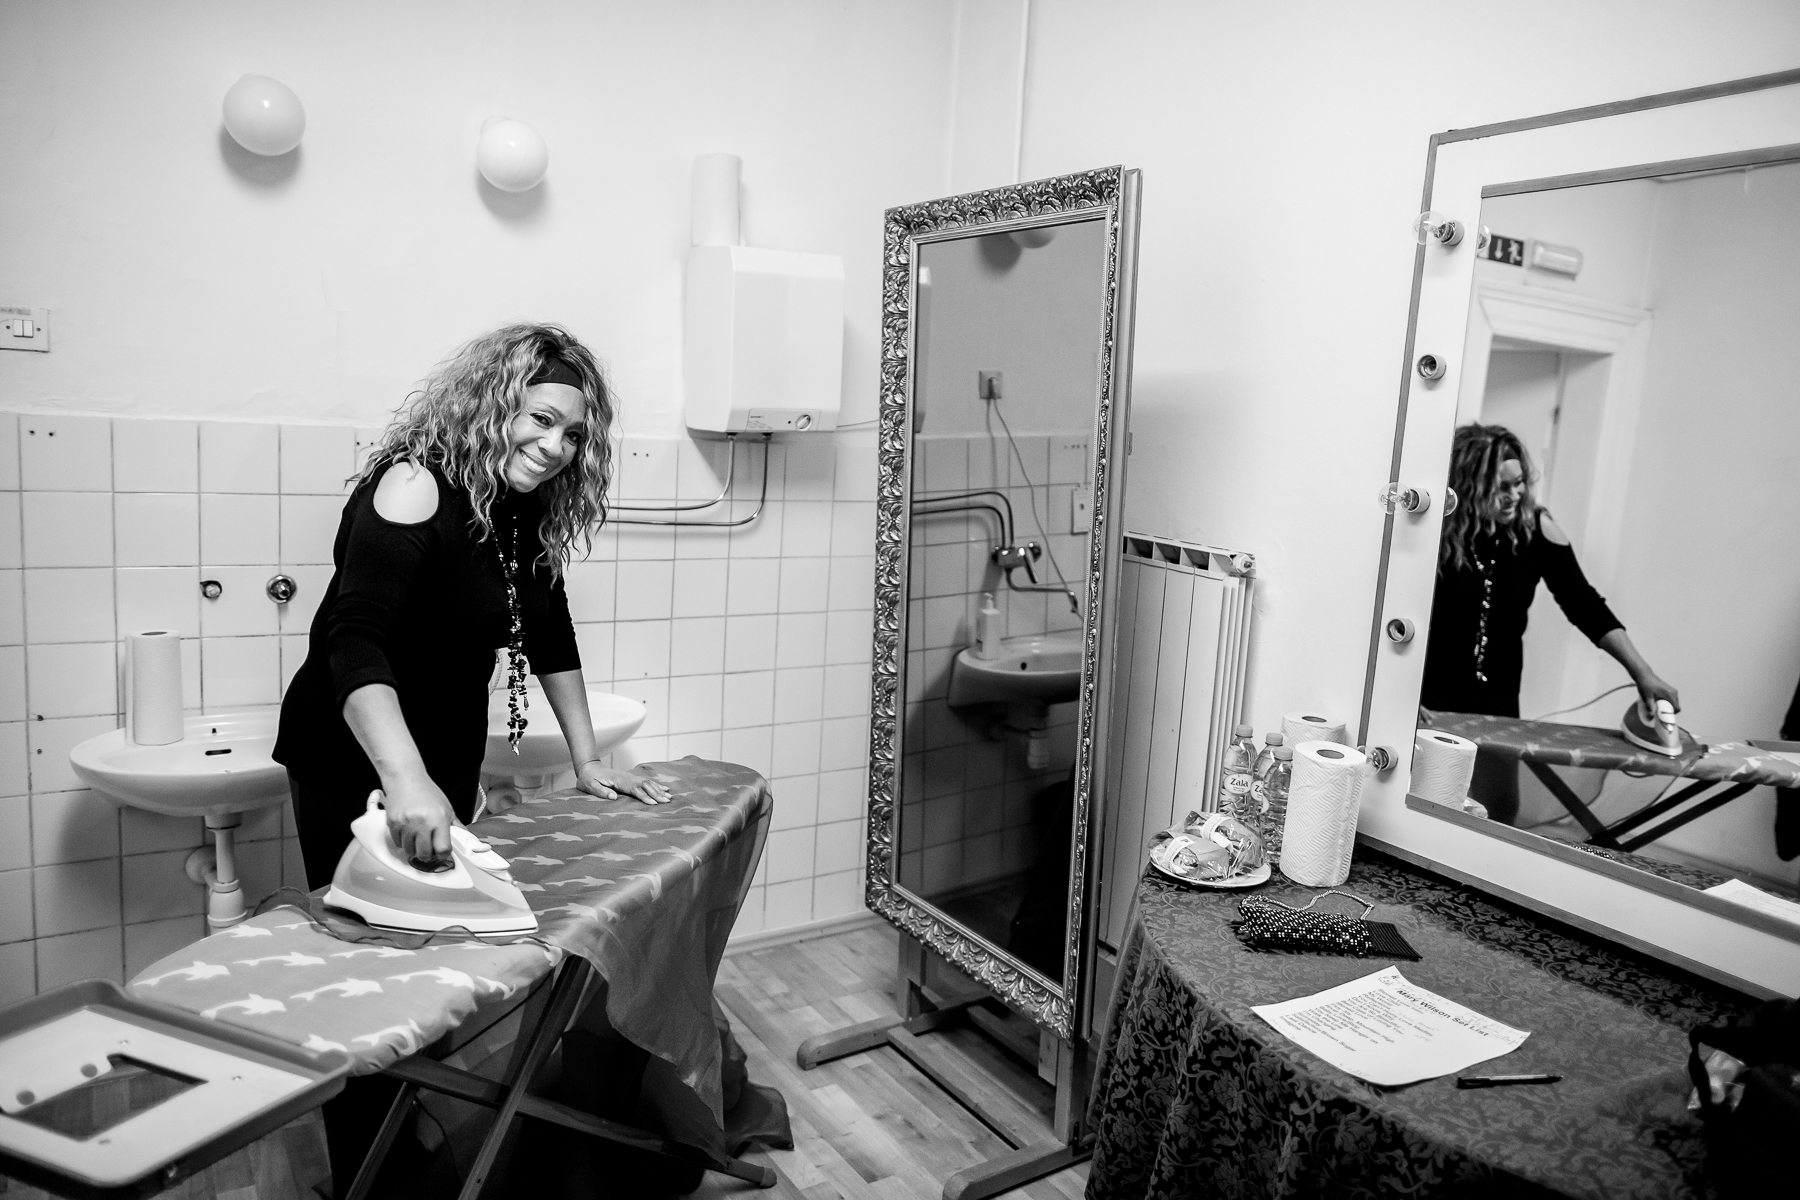 Mary Wilson of the Supremes irons her cover ups backstage before the concert in Maribor, Slovenia, February 4, 2020.